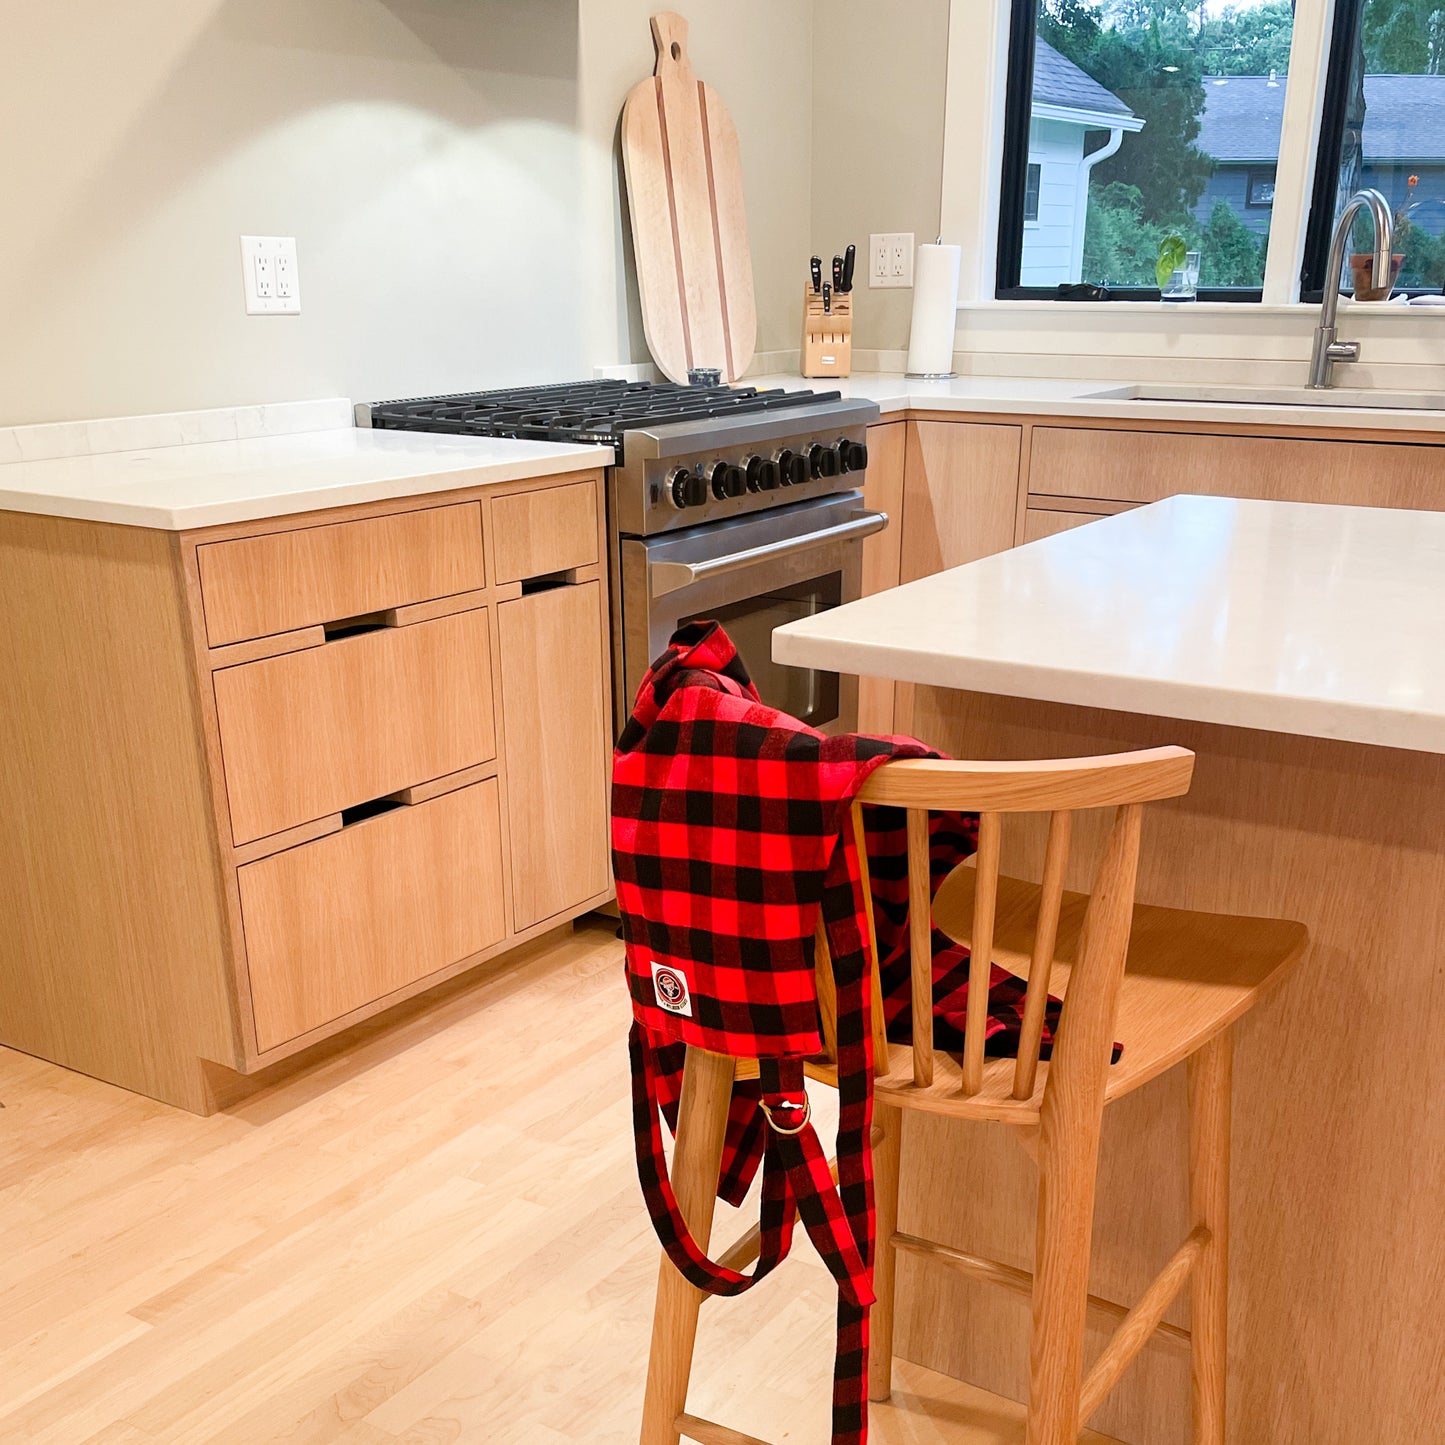 red and black buffalo check flannel apron hanging on chair in kitchen